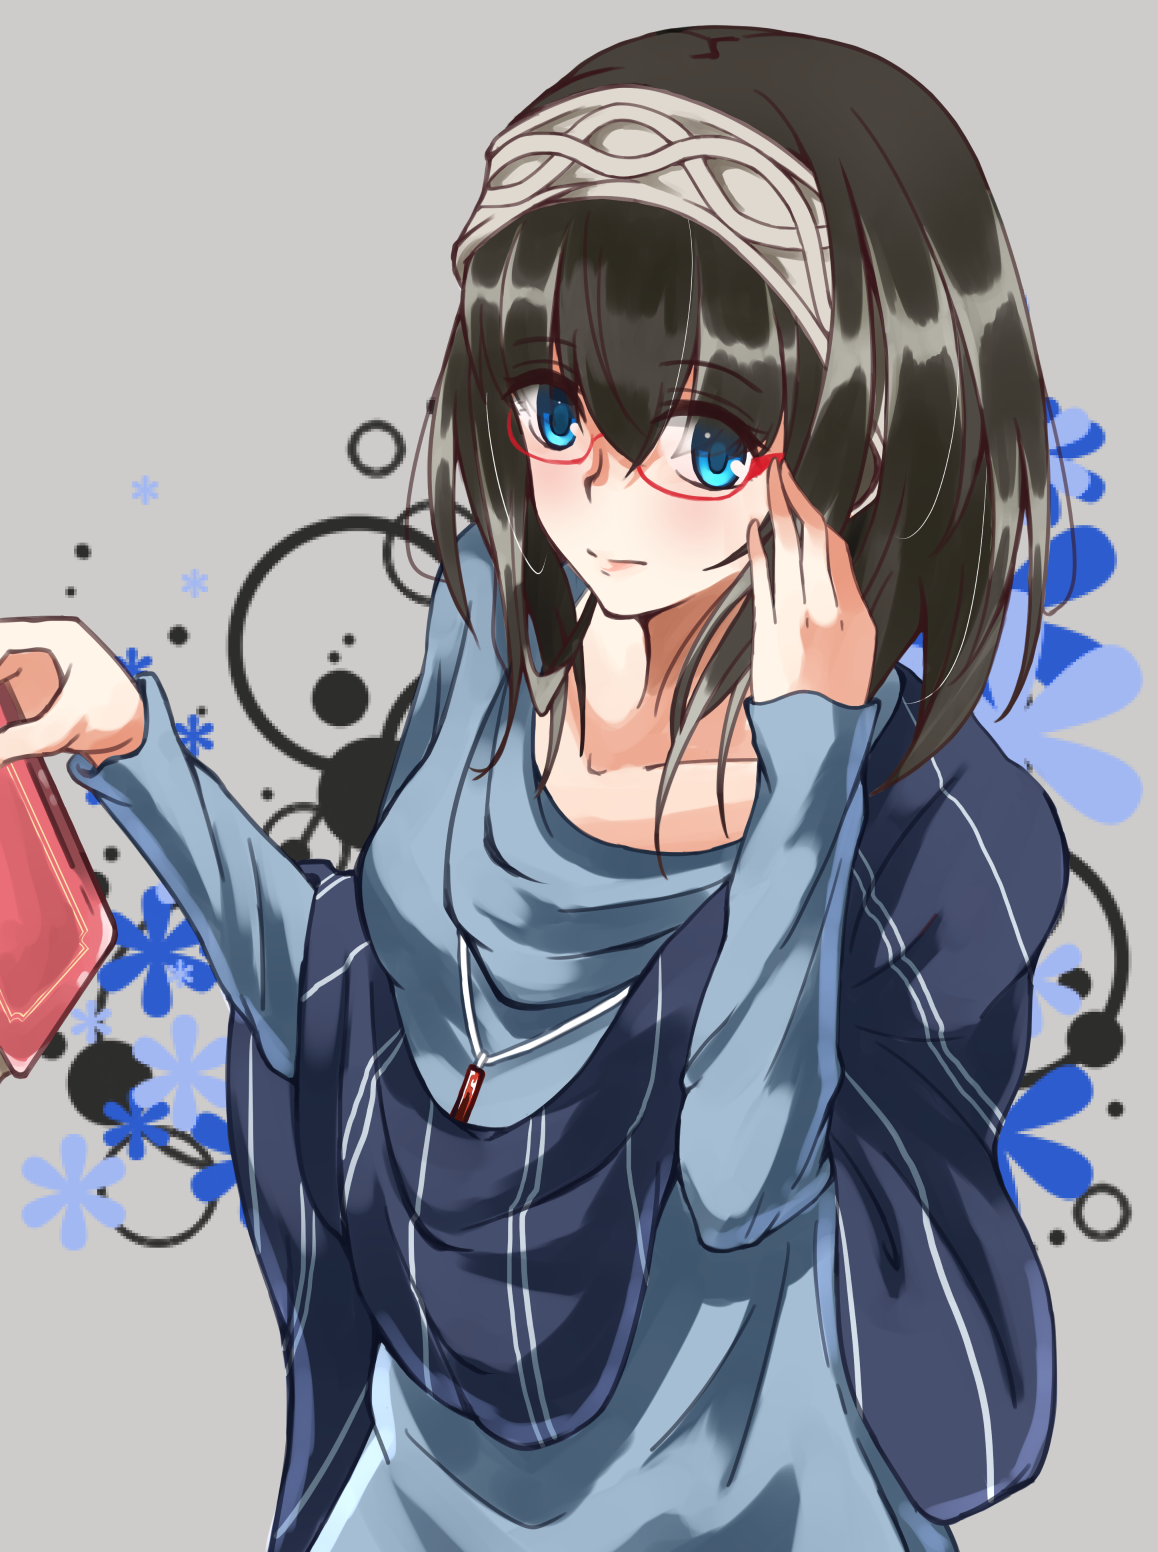 Anime 1158x1552 anime anime girls dark hair blue eyes women with glasses Pixiv gray background looking at viewer long hair